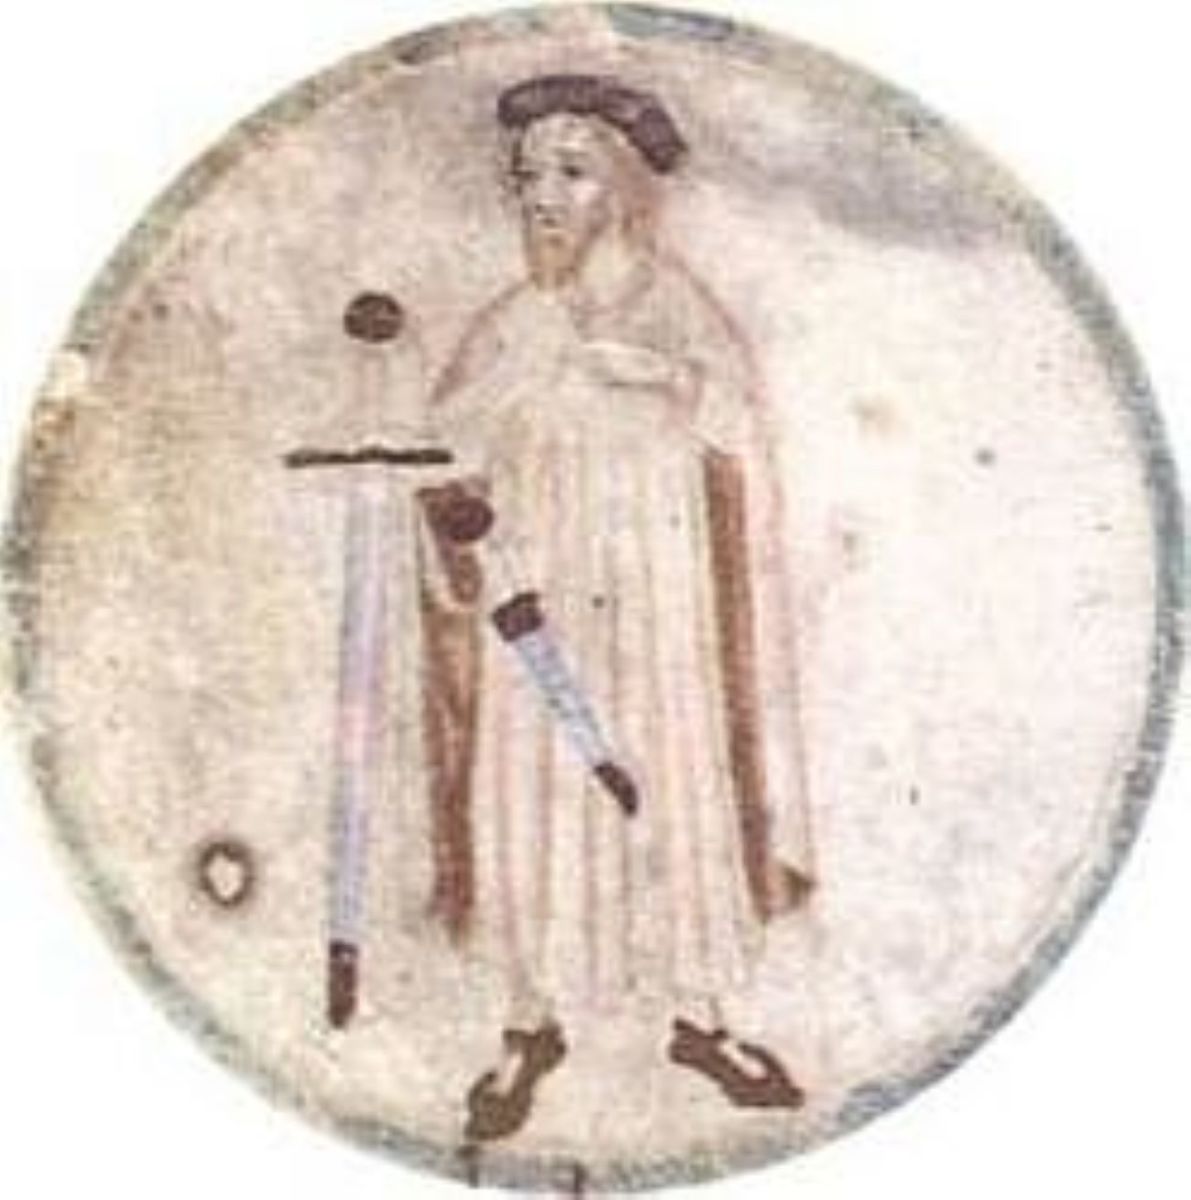 Wilfred the Hairy depicted in a 15th century book Genealogia dels reis d'Aragó.